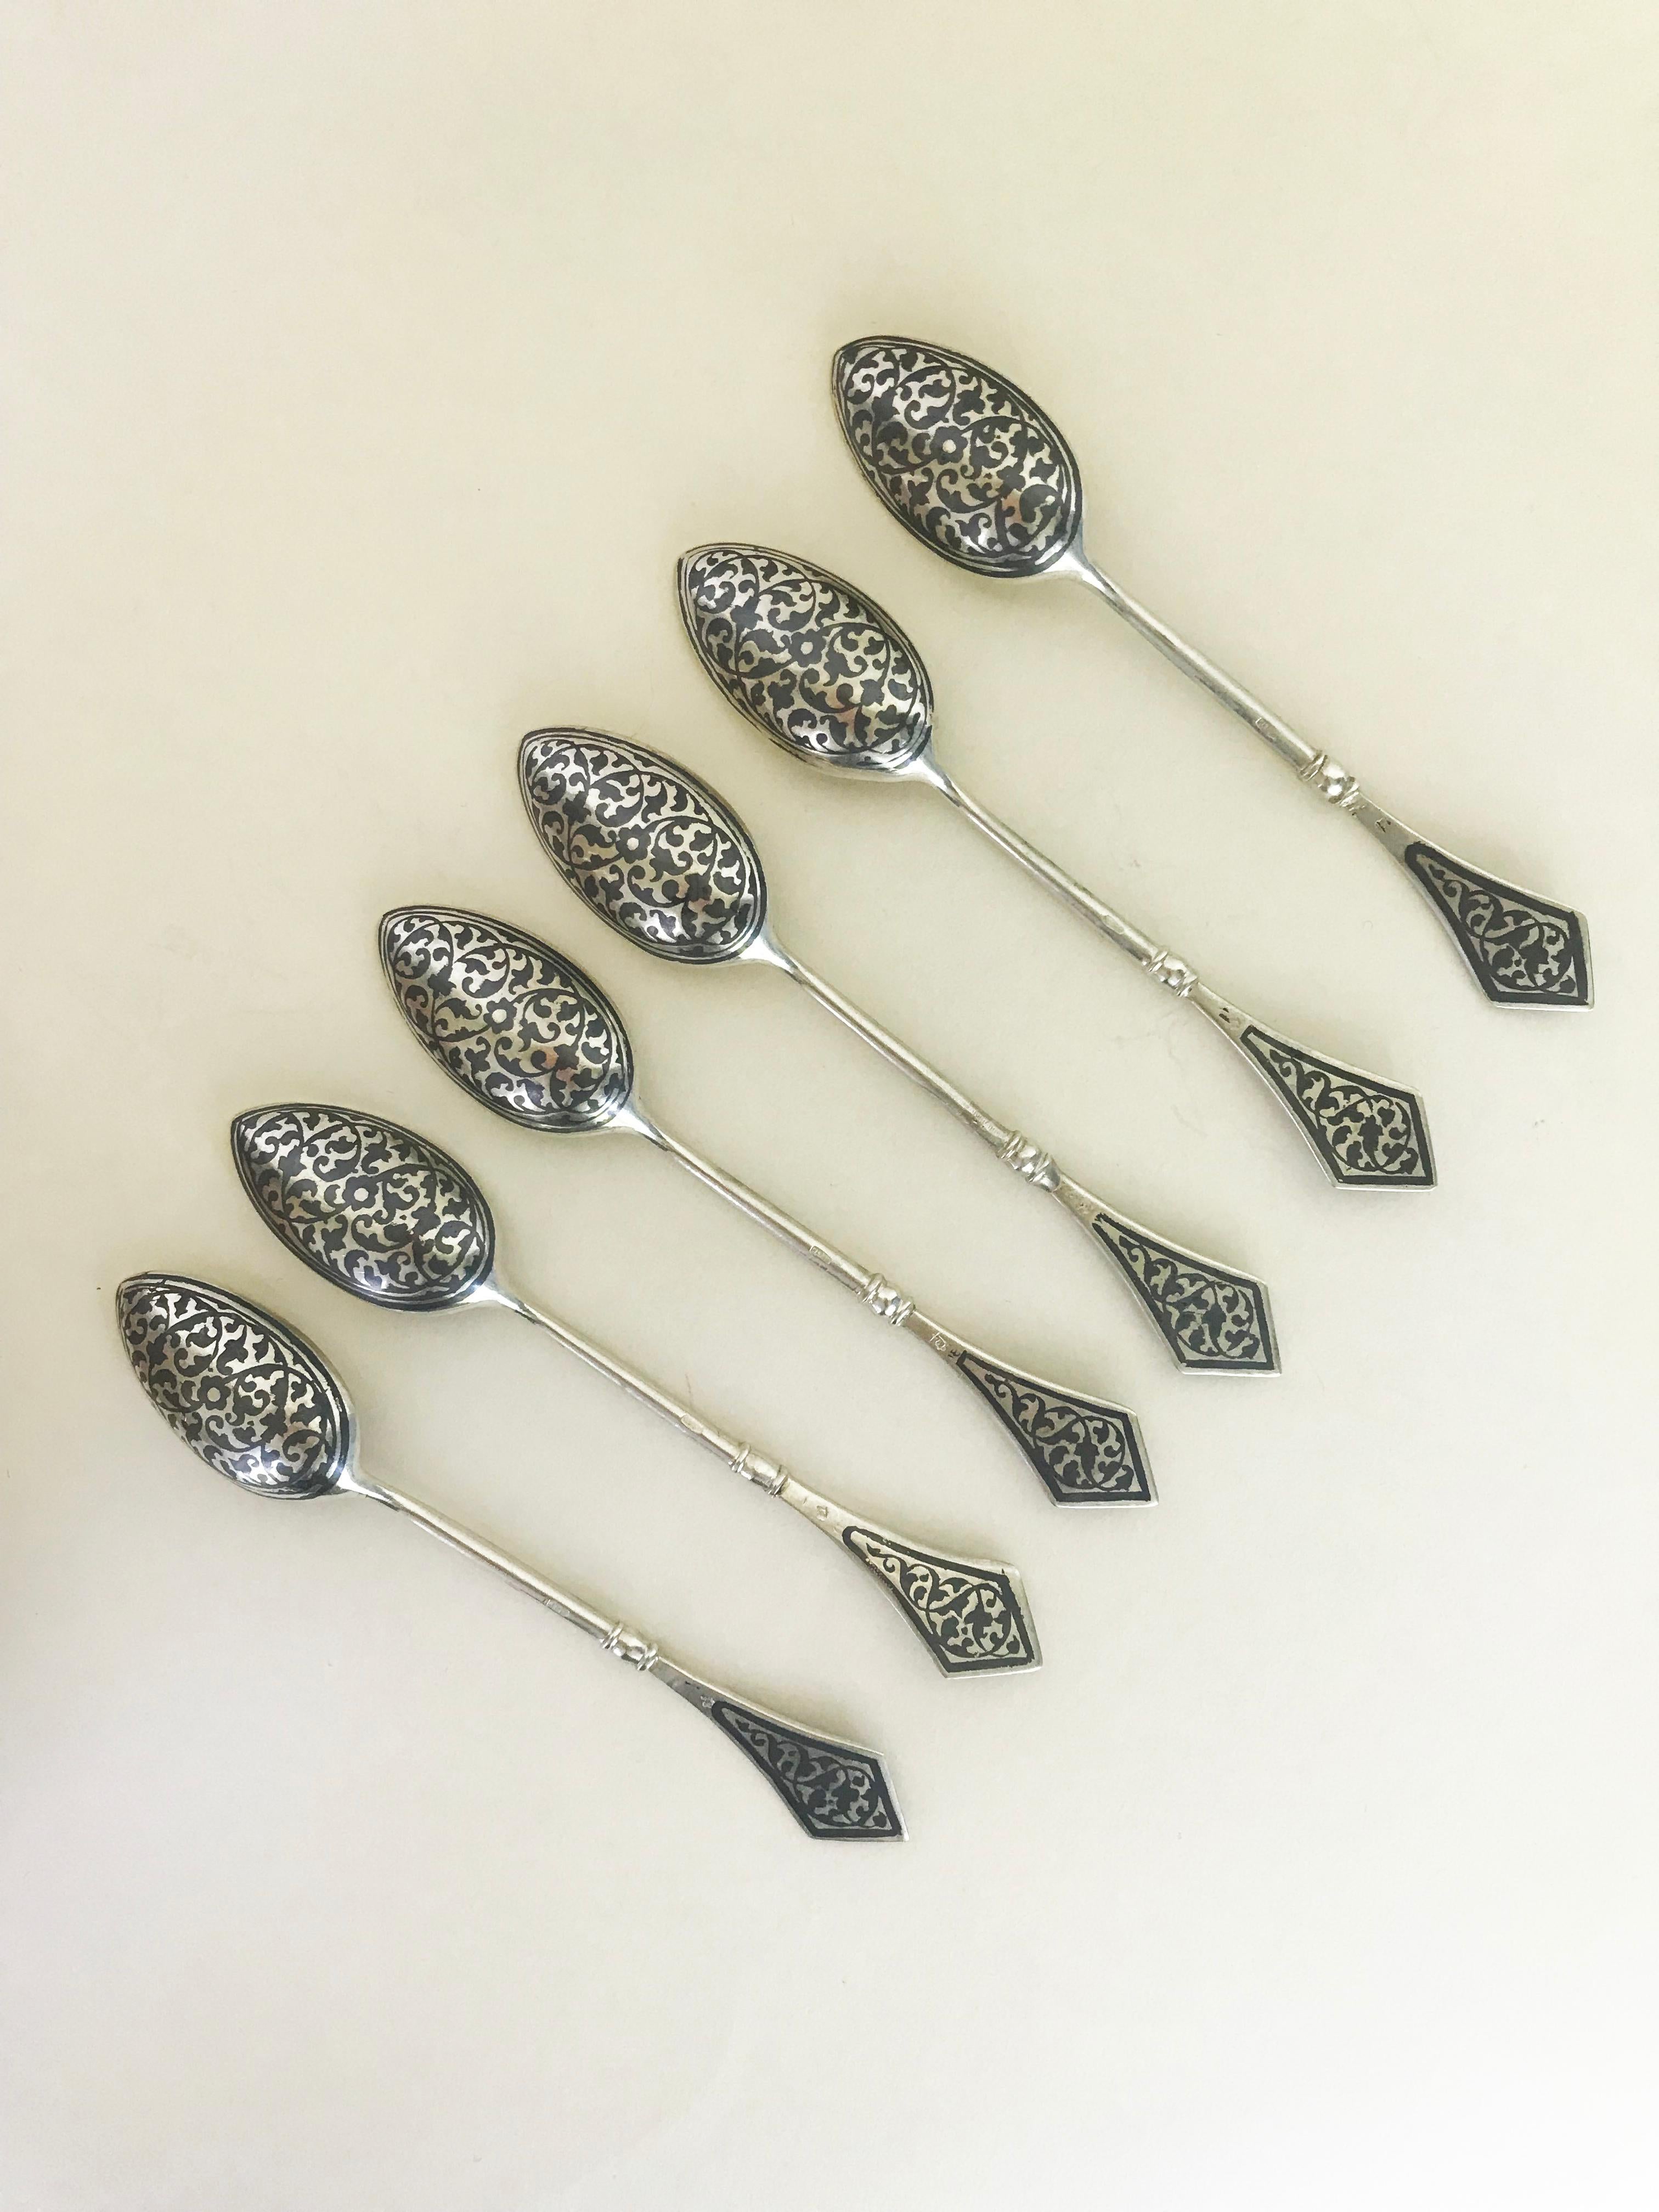 This beautiful and unique set of fine vintage silver - guilt niello Russian spoons are antique pieces from the 20th century. This set of six tea spoons are five inches in length and they are 24 grams of sterling silver. They are rare collection